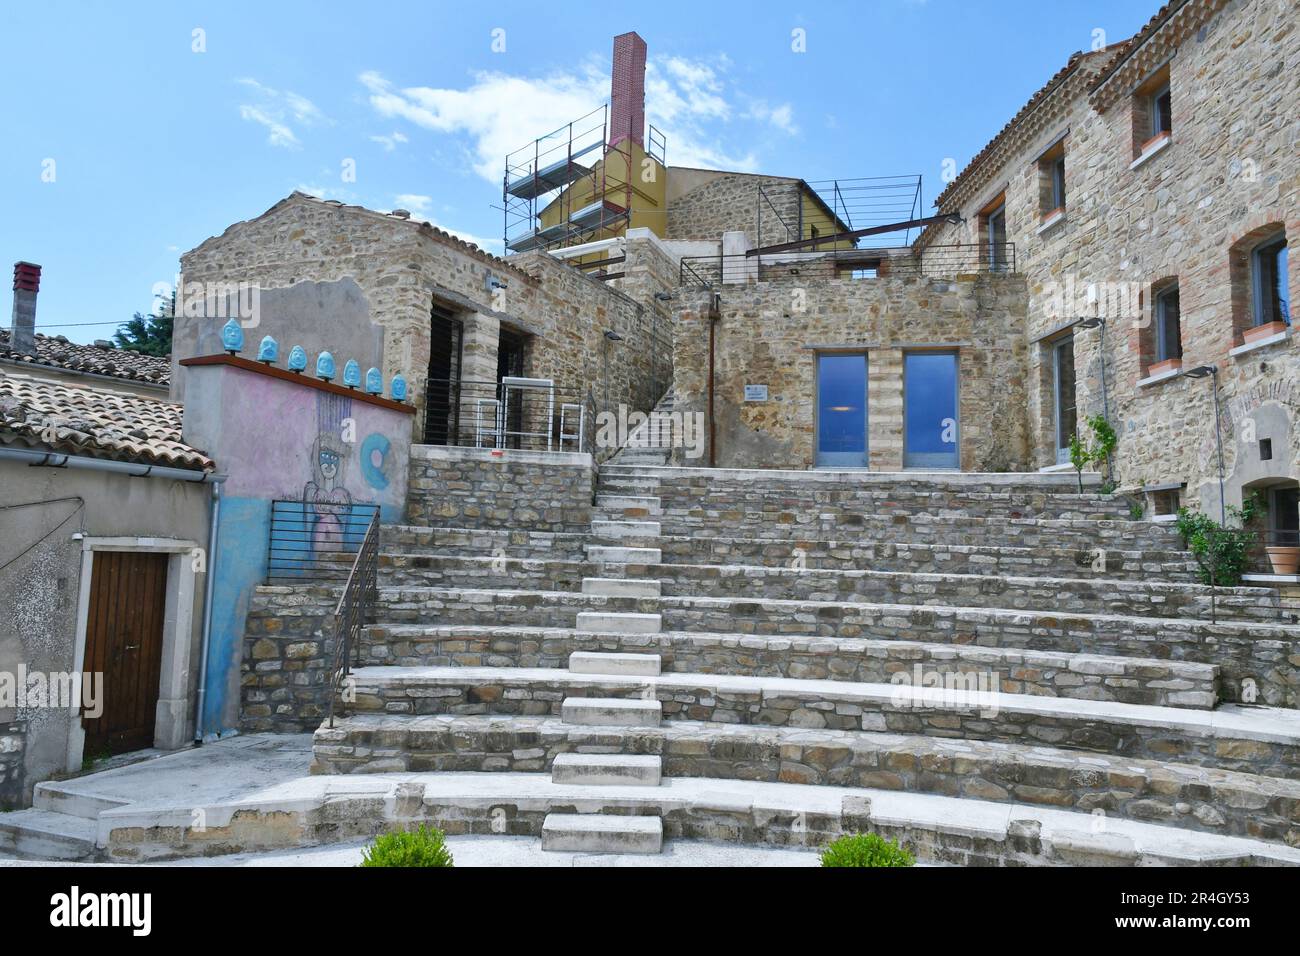 An outdoor amphitheater in the village of Cairano in Campania, Italy. Stock Photo